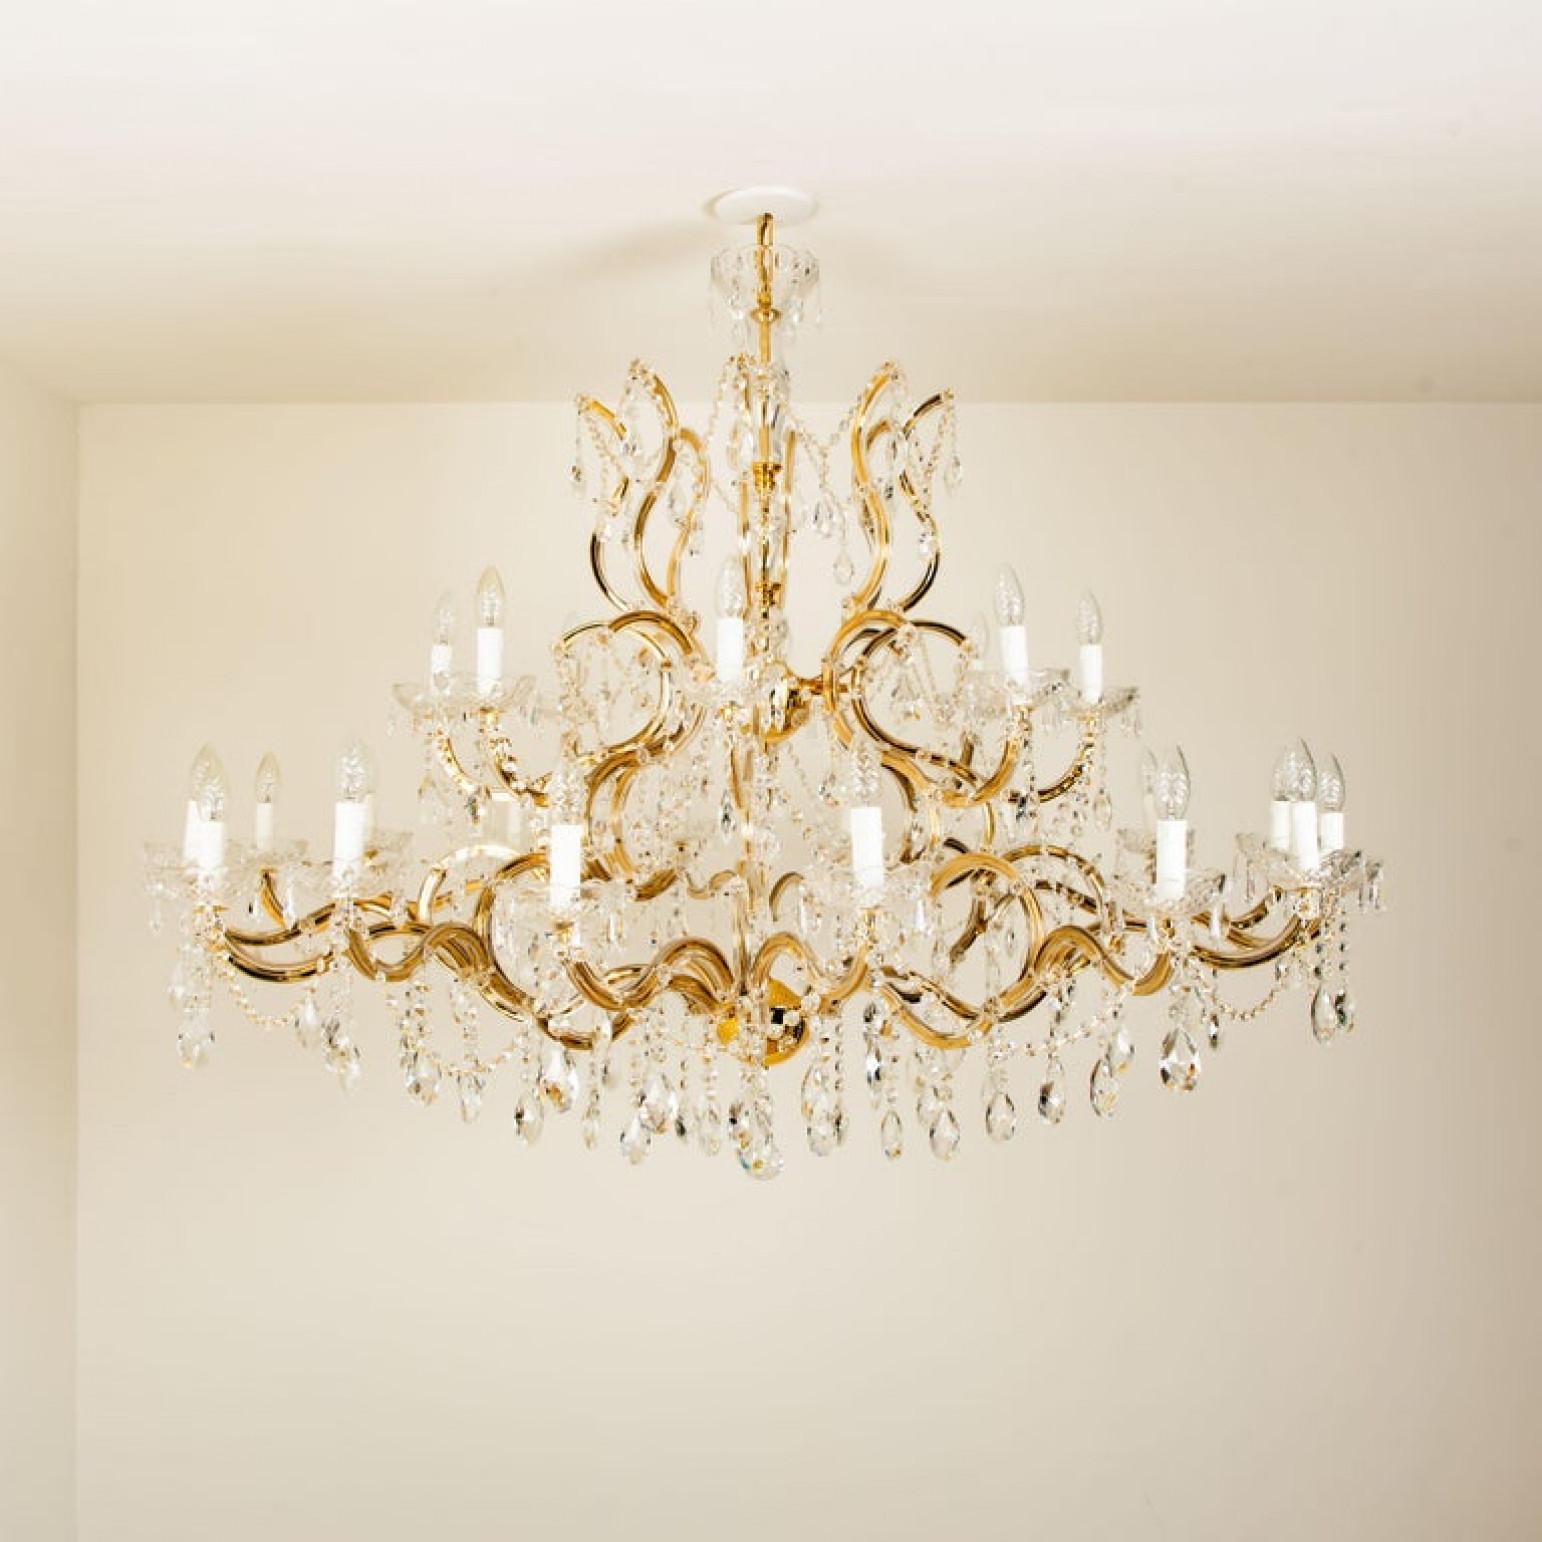 Huge High-End XXL Maria Theresa Gold Plated Swarovski Chandelier For Sale 12